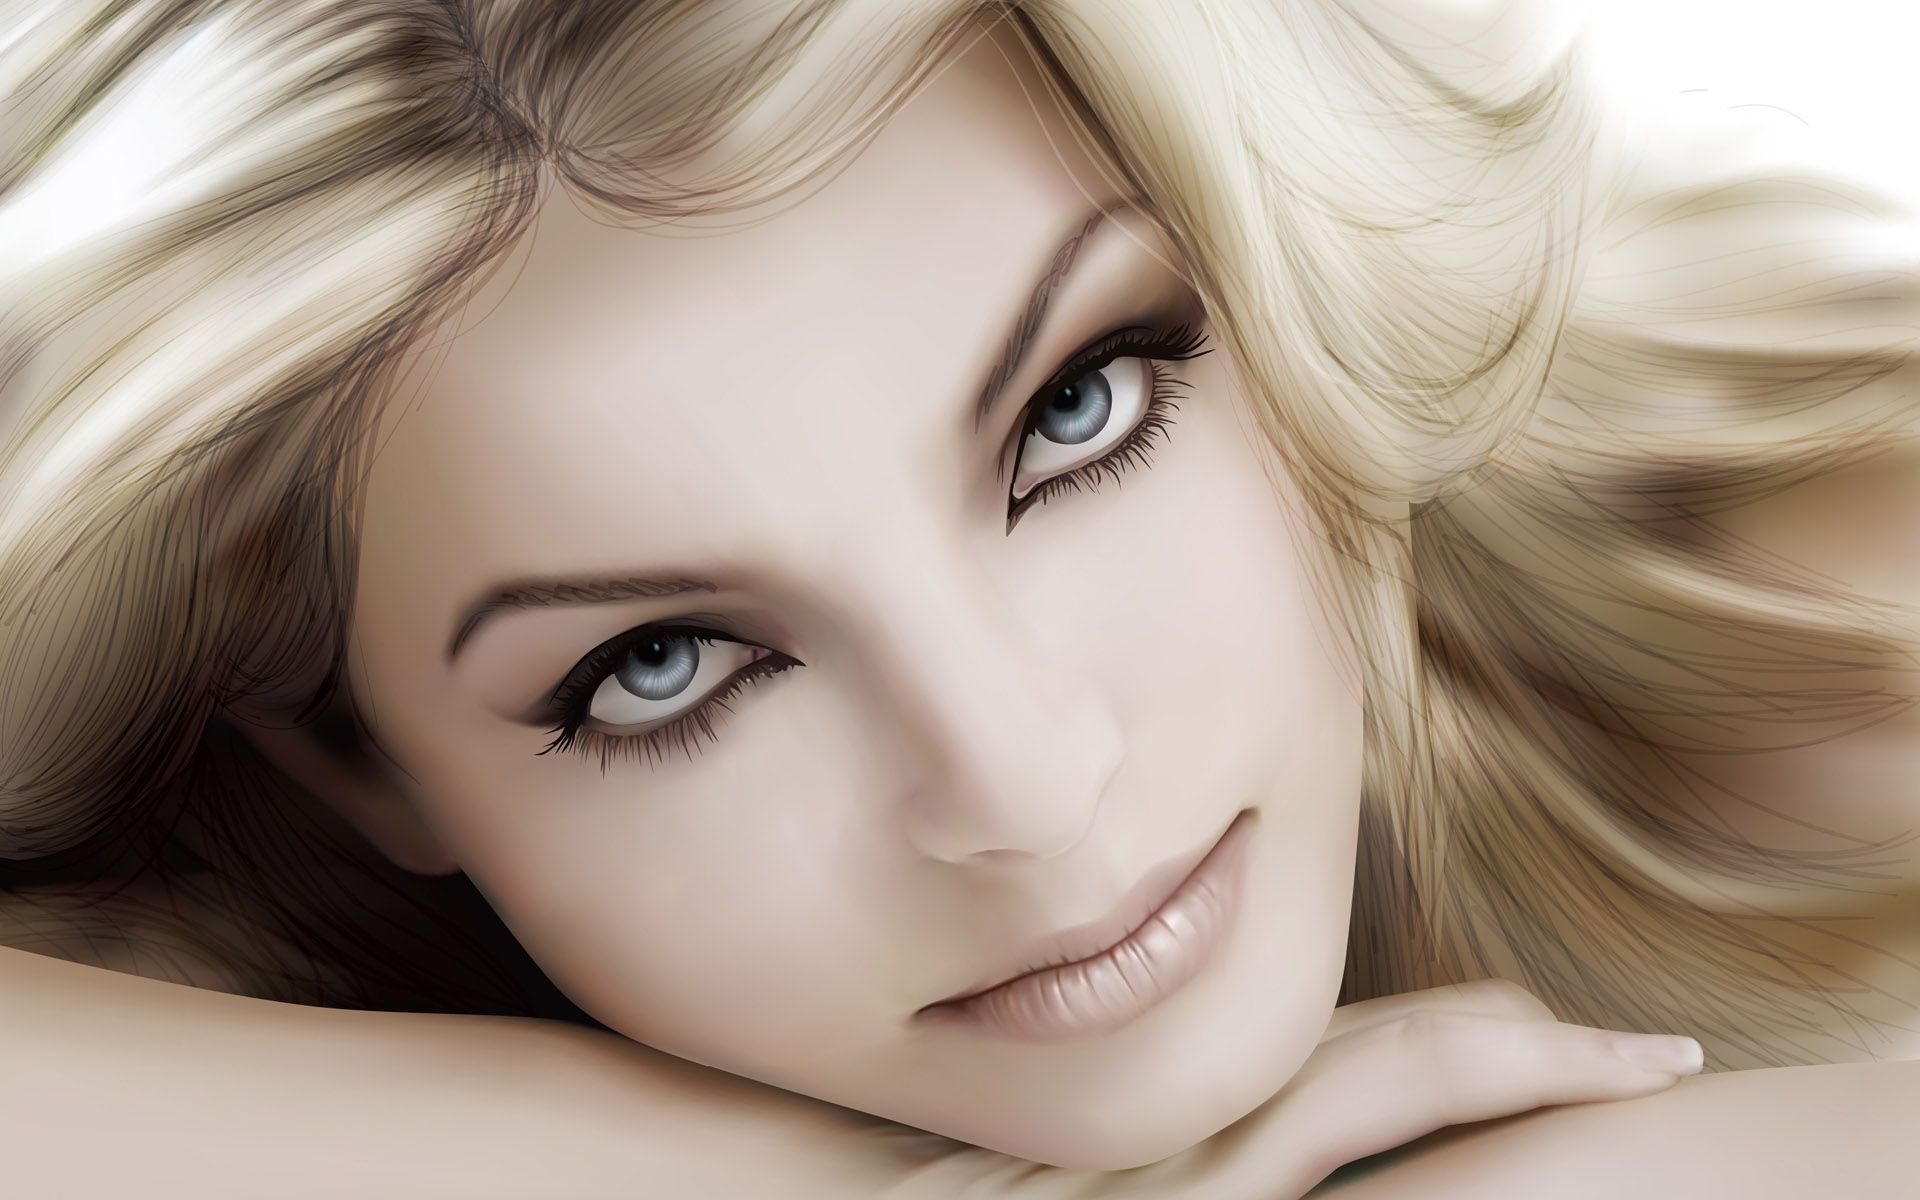 Beautiful Faces Wallpapers - HD Wallpapers and Pictures